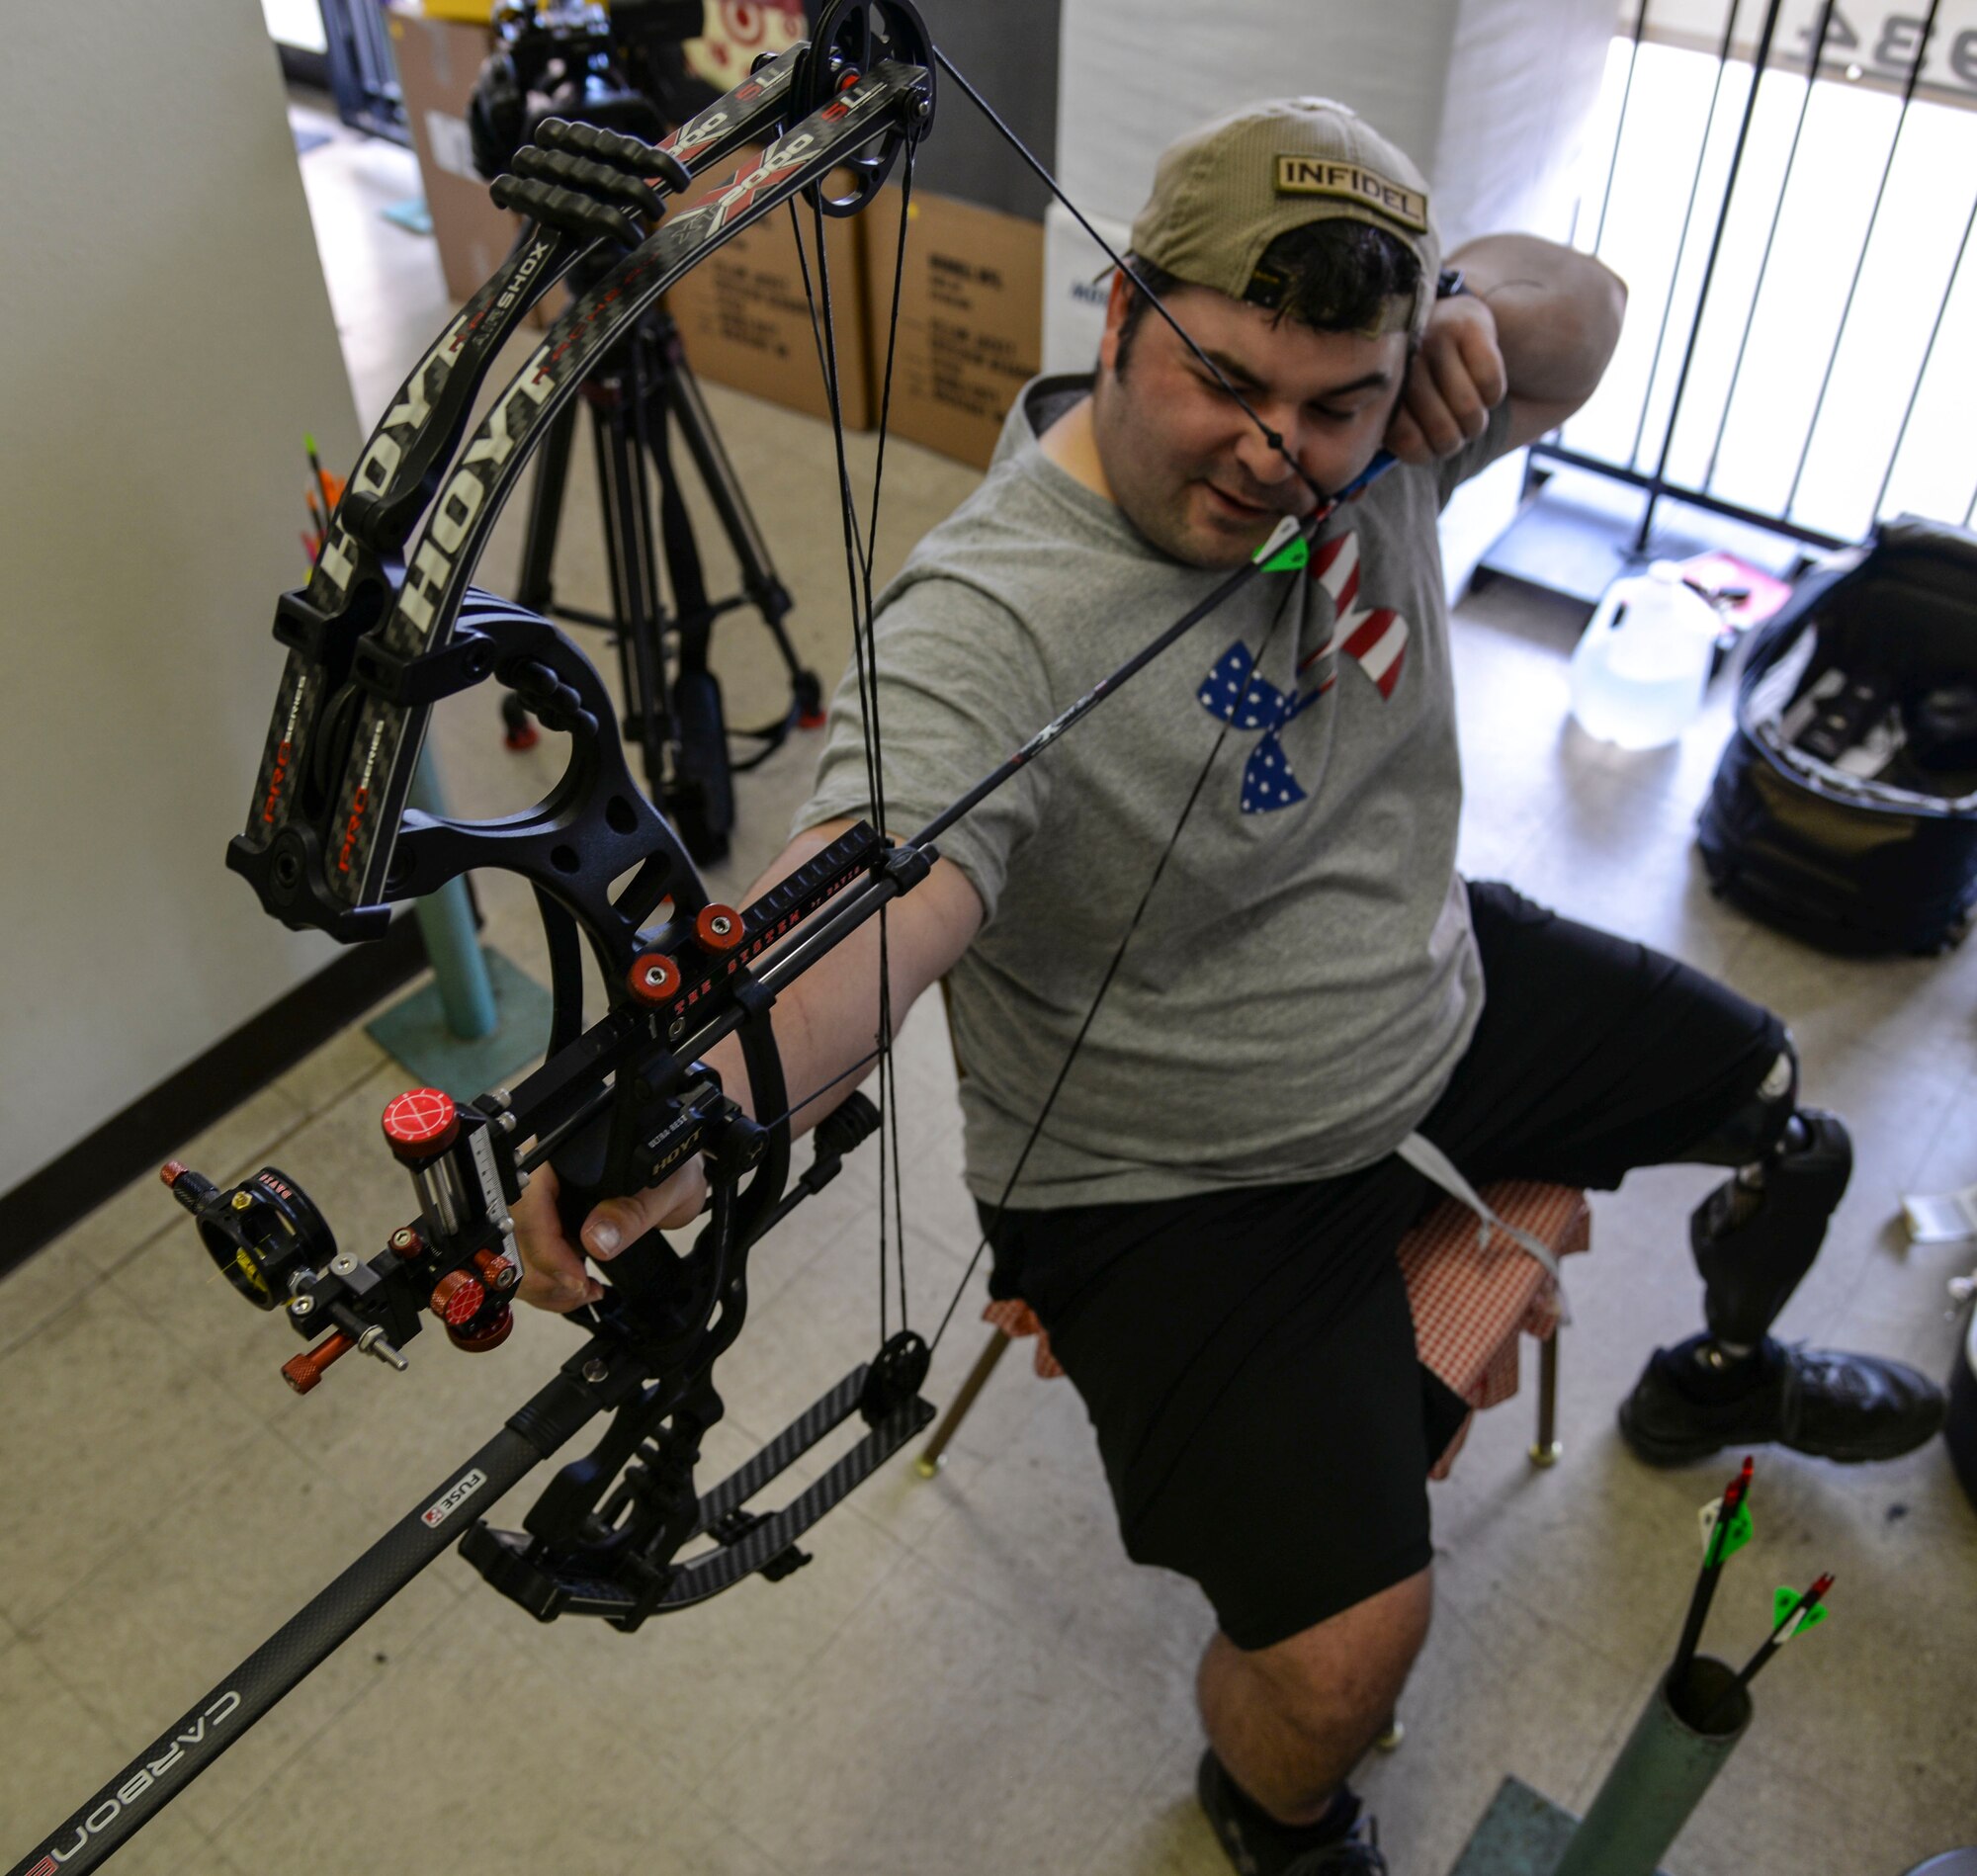 U.S. Air Force Staff Sgt. Seth Pena, a former tactical control air party member currently with the 59th Medical Wing's Airman Medical Transition Unit, aims his compound bow at a target Sept. 12, 2014 at a local archery facility in San Antonio. Seriously injured by a drunk driver, Pena is now vying for a spot on the Air Force archery team competing at the 2014 Warrior Games Sept. 28 through Oct. 4, 2014, in Colorado Springs, Colorado. (U.S. Air Force photo/Senior Airman Michael Ellis)